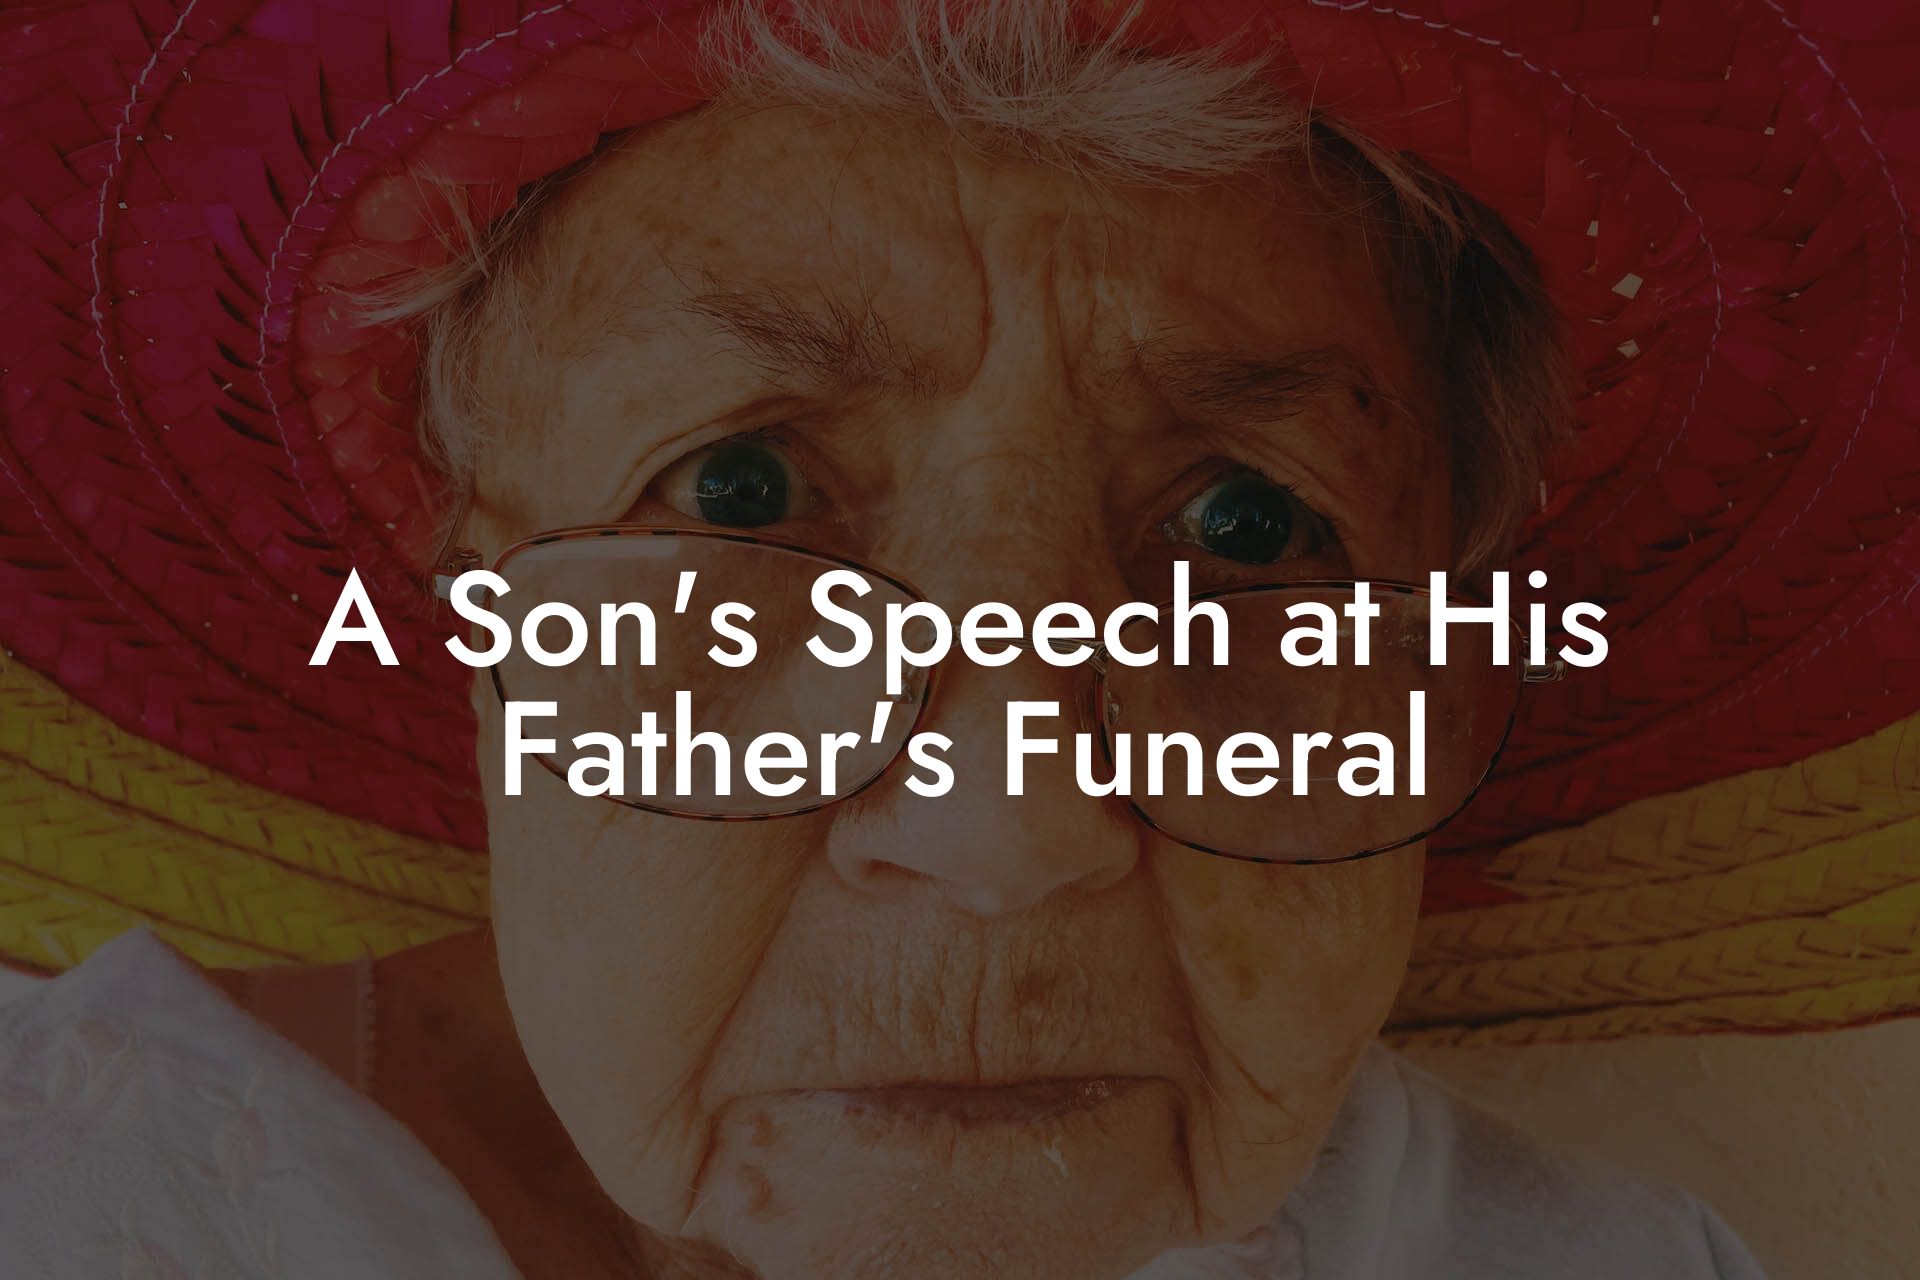 A Son's Speech at His Father's Funeral